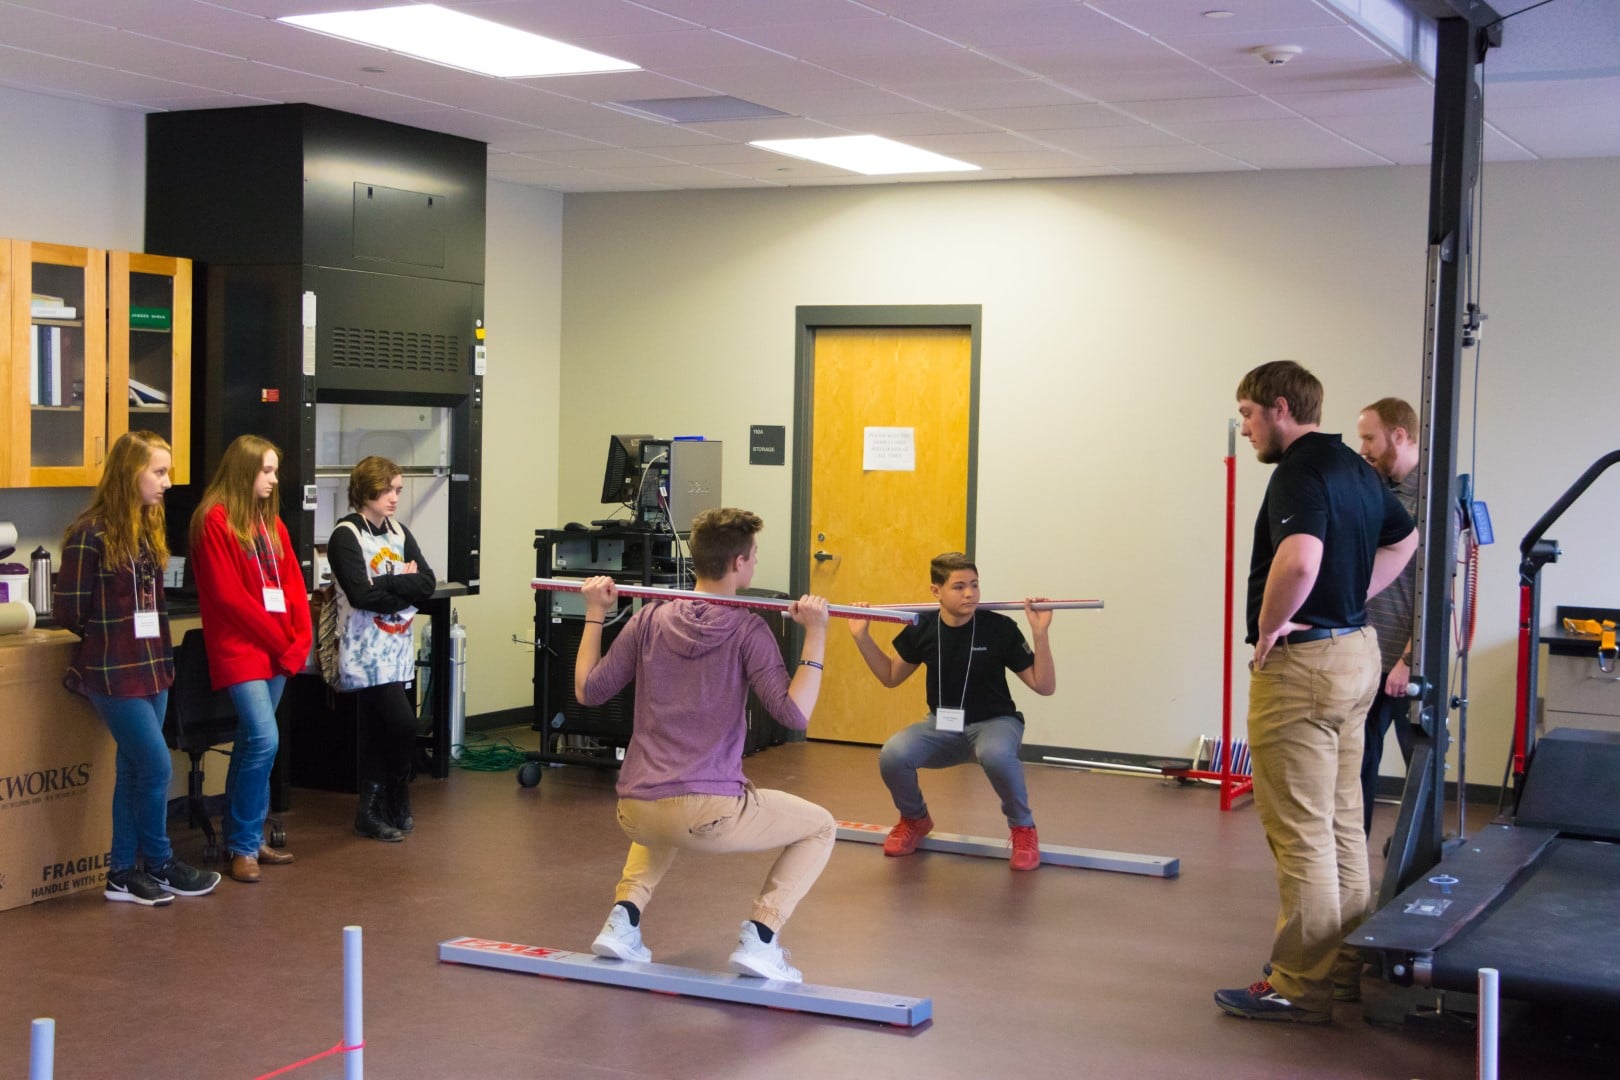 A group of people exercising in a room at Vermont State University.